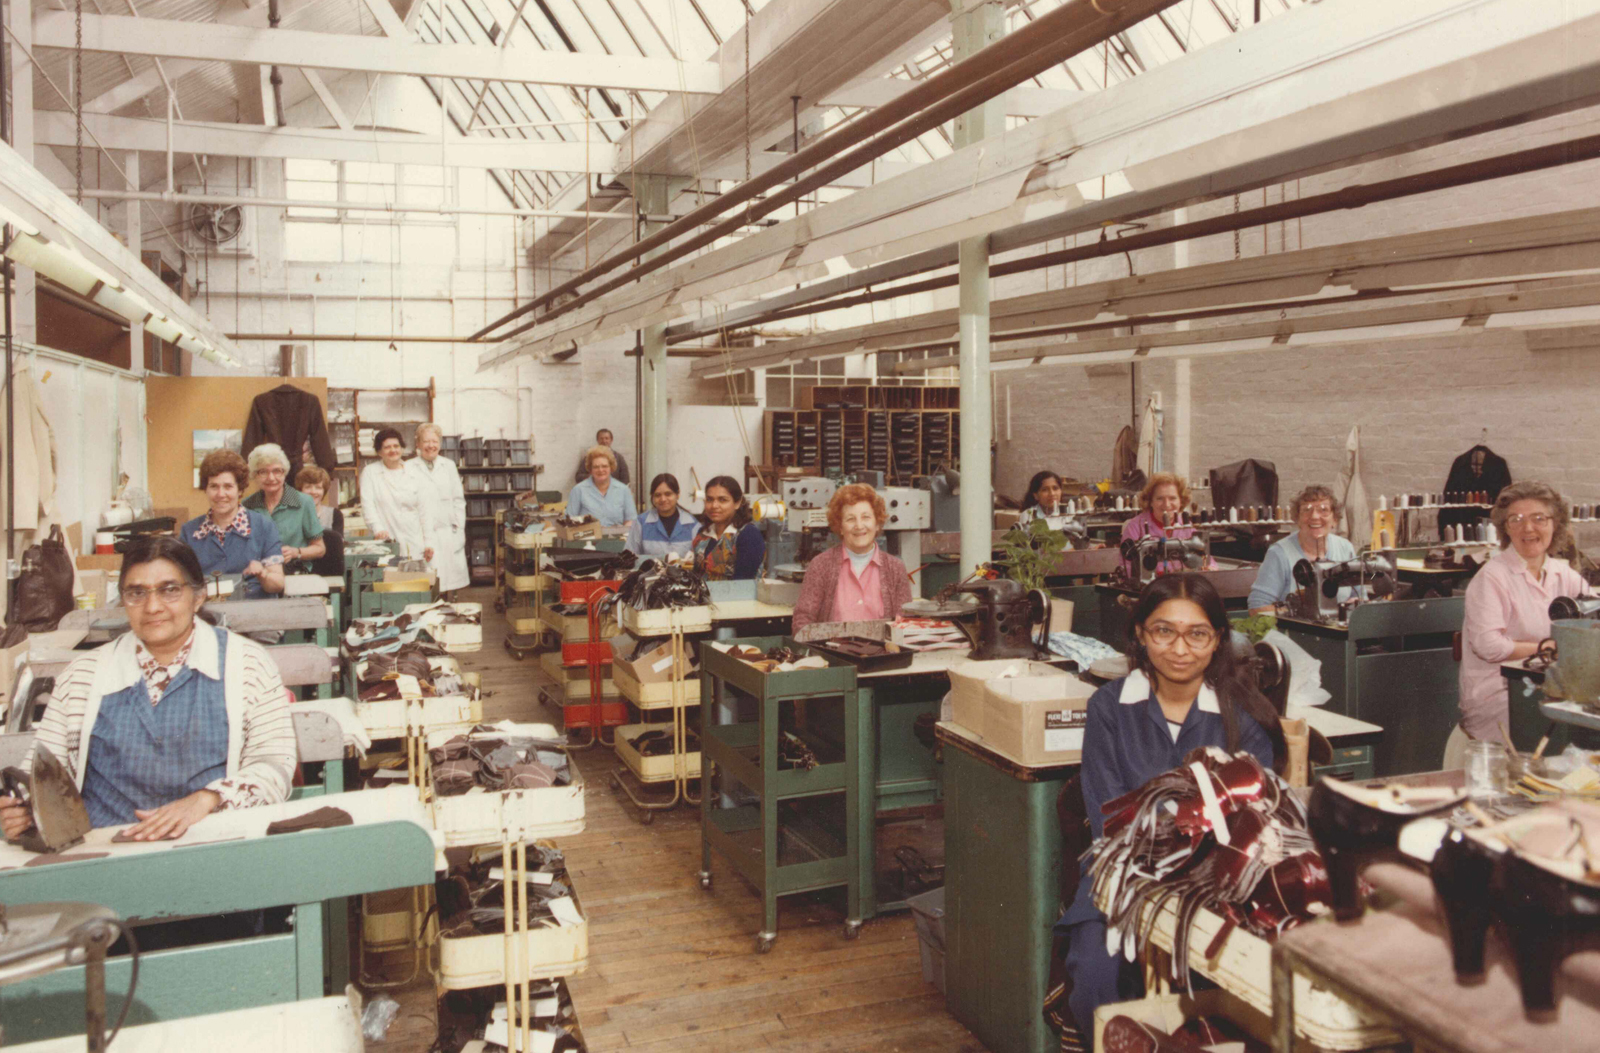 Shoe factory workers in Leicester